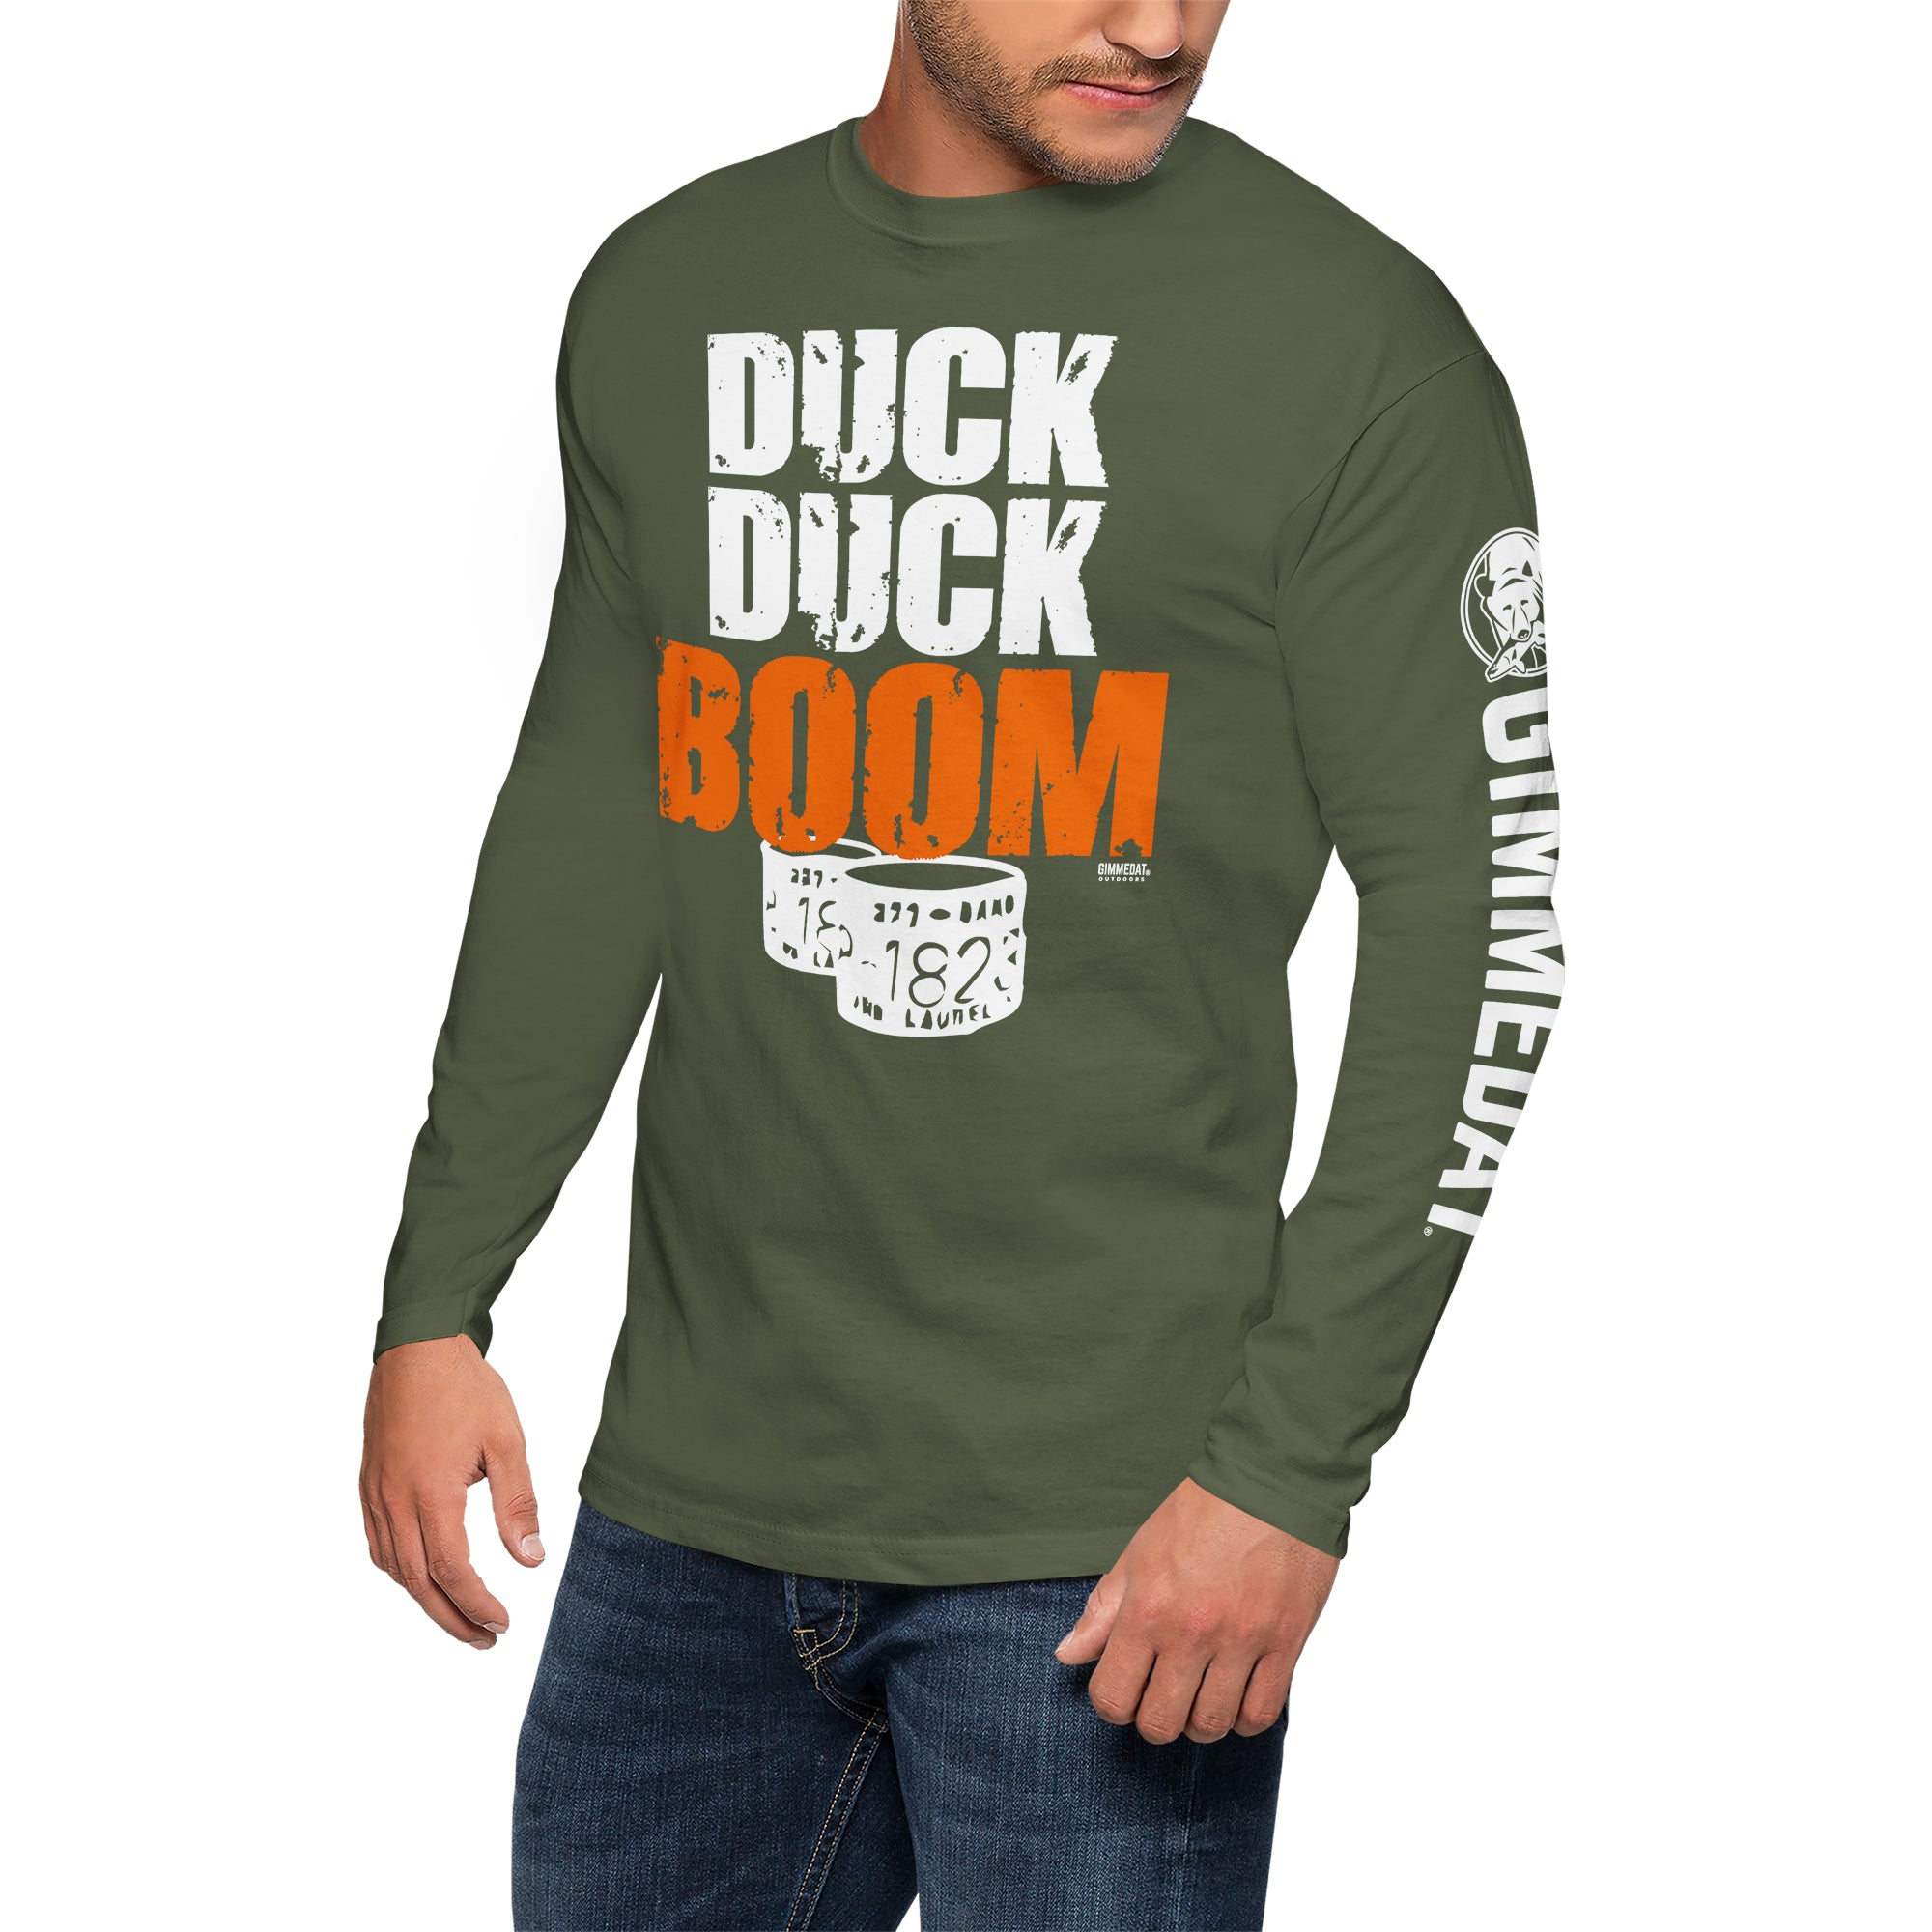 Duck Duck Goose Personalized Short or Long Sleeves Shirt